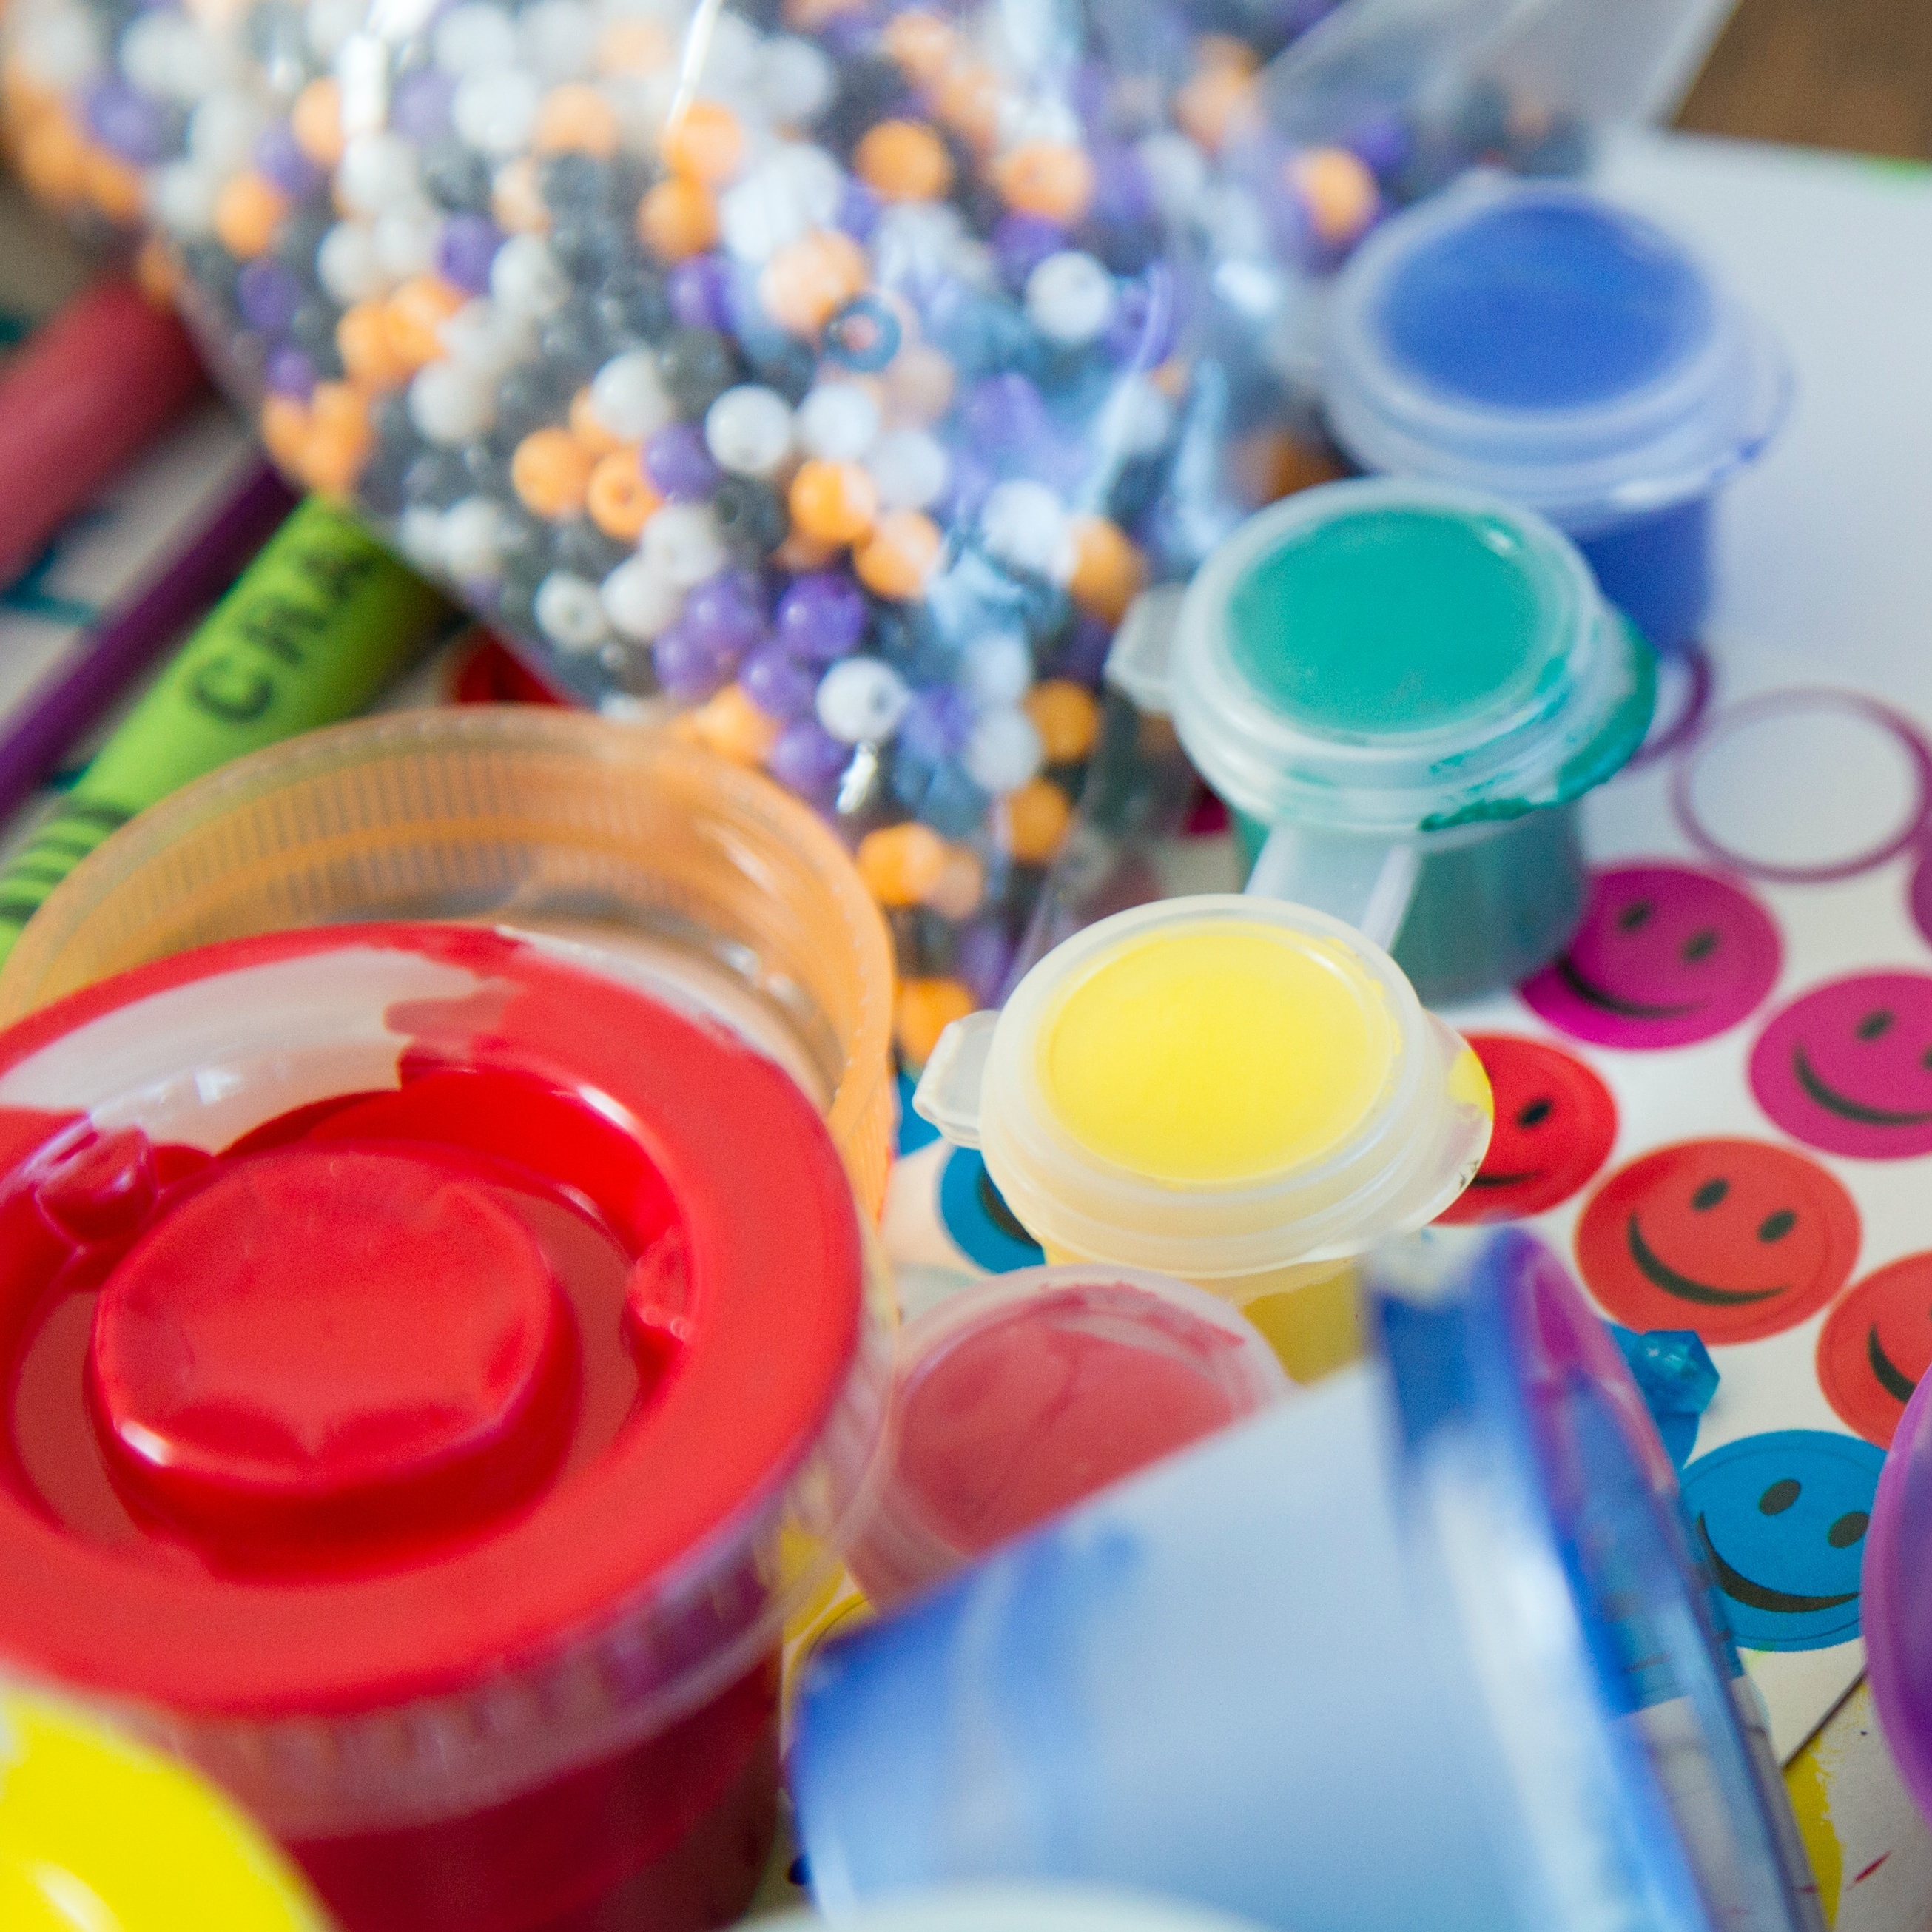 Pots of paint, smiley face stickers and other art supplies